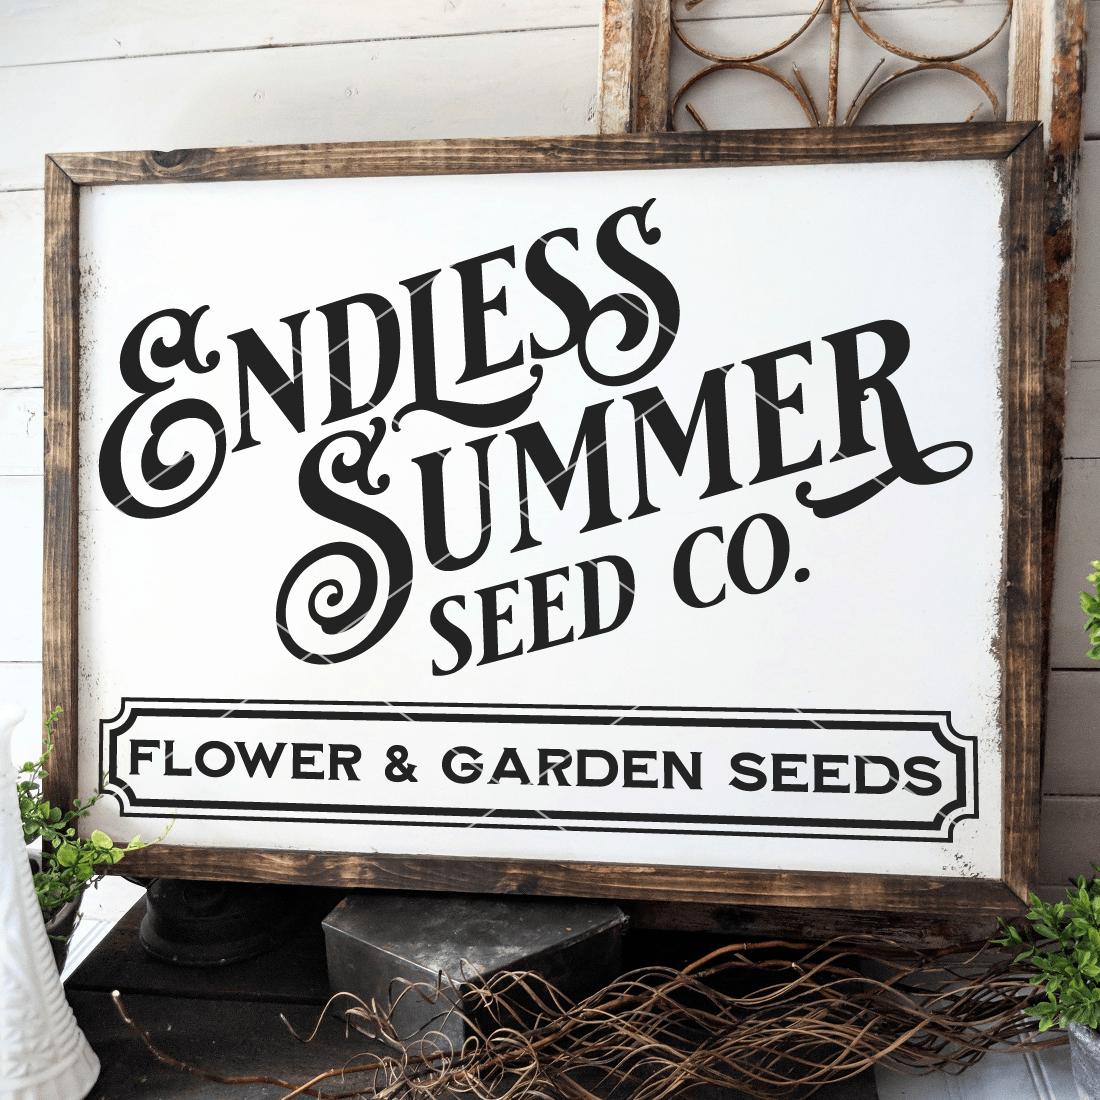 Endless Summer Seed Company SVG File for Gardeners - Commercial Use SVG Files for Cricut & Silhouette